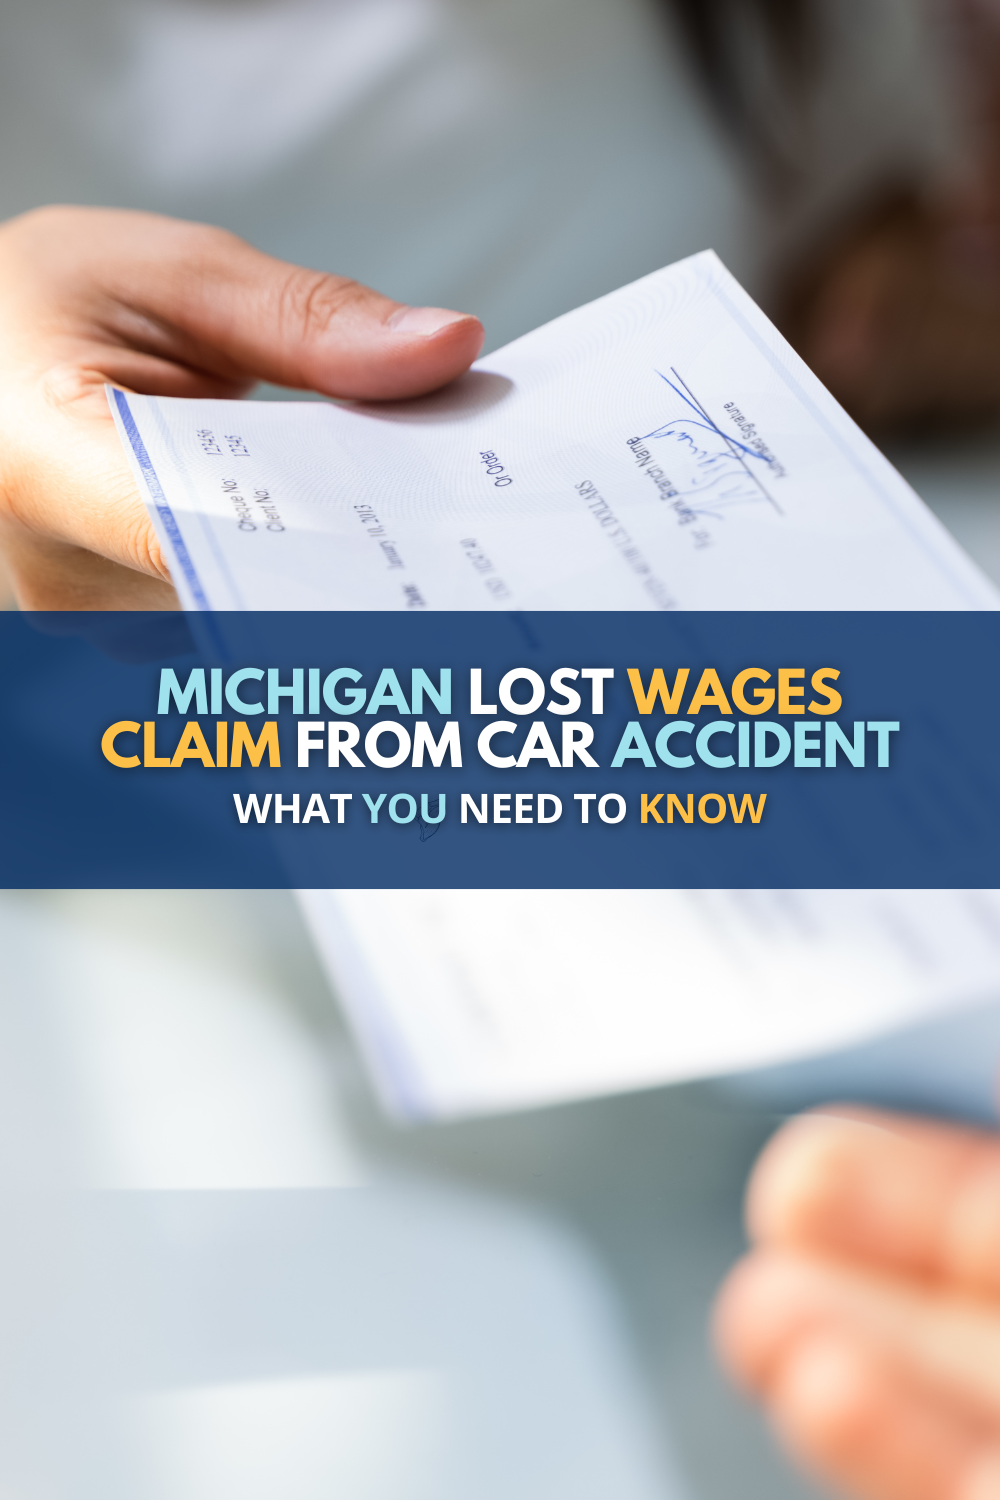 Michigan Lost Wages Claim From Car Accident: What You Need To Know